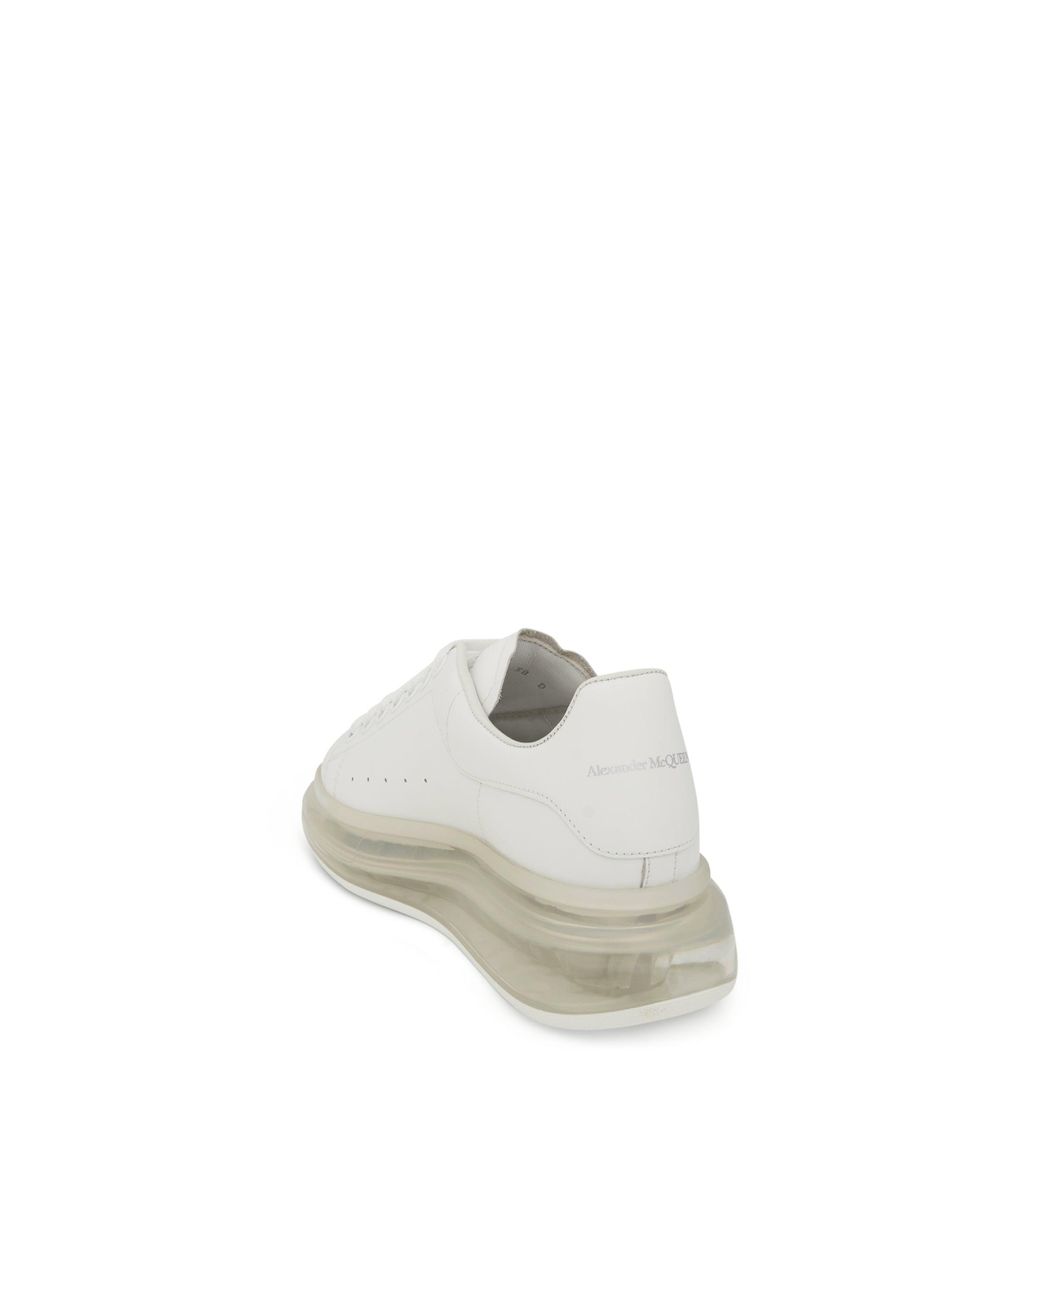 KARL LAGERFELD Karl Lagerfeld women sneakers in white leather, side graphic  rubber patch, neon pink transparent sole 2051DP62630A, white women sneakers  women sneakers white women white shoes - 2051dp62630a - Shoes KARL